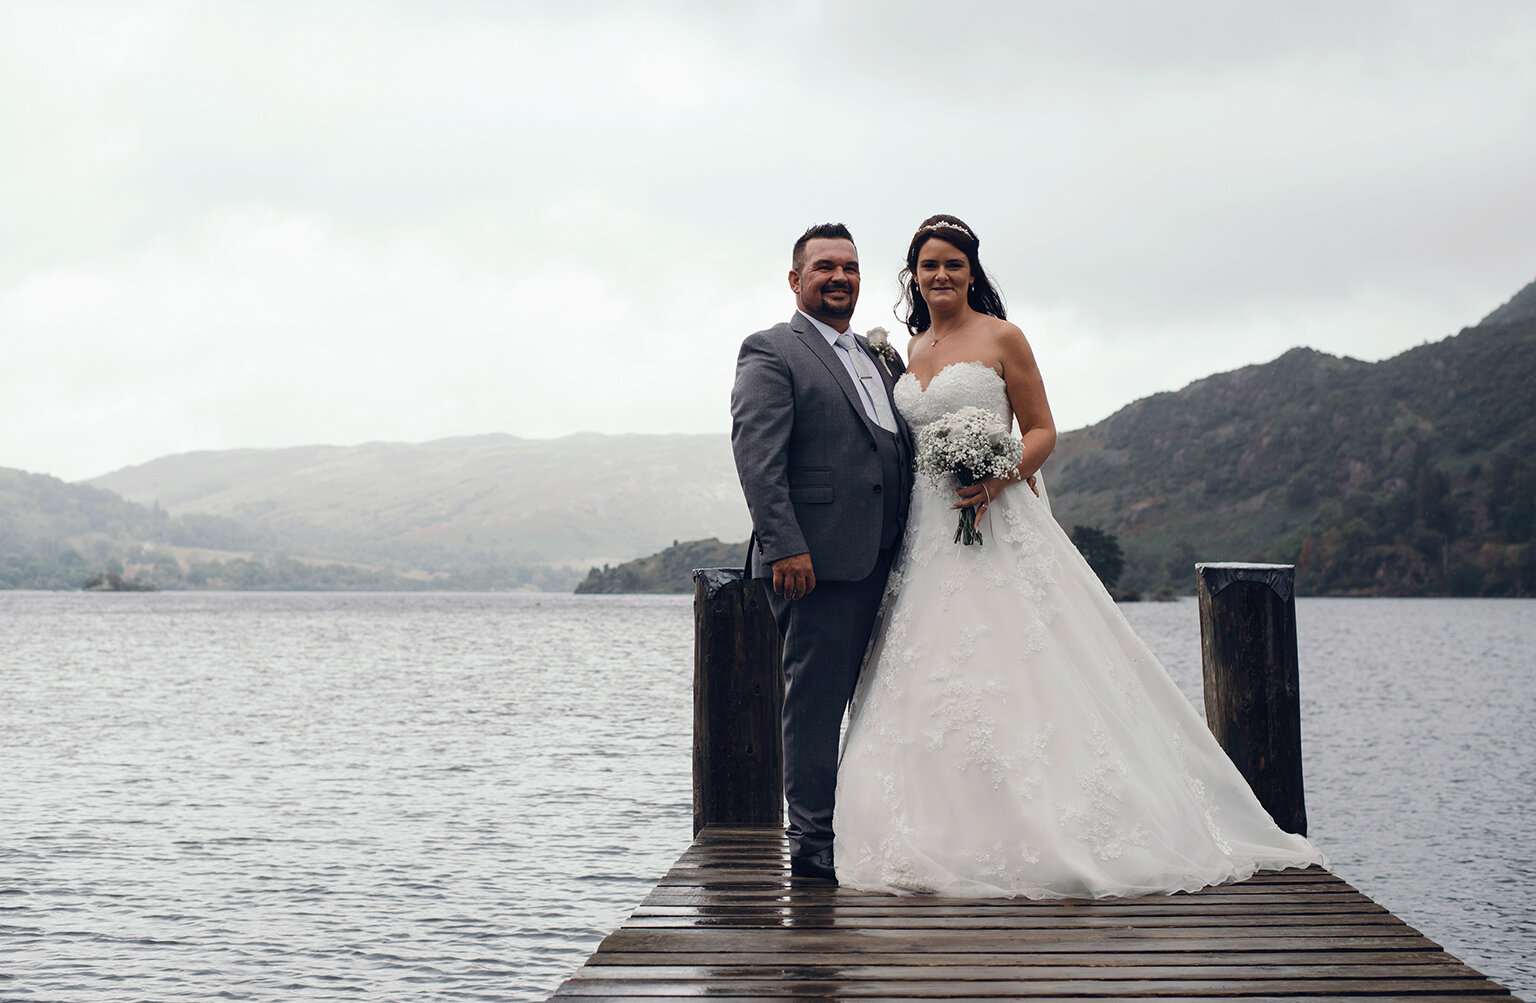 The bride and groom standing at the end of the jetty overlooking Ullswater